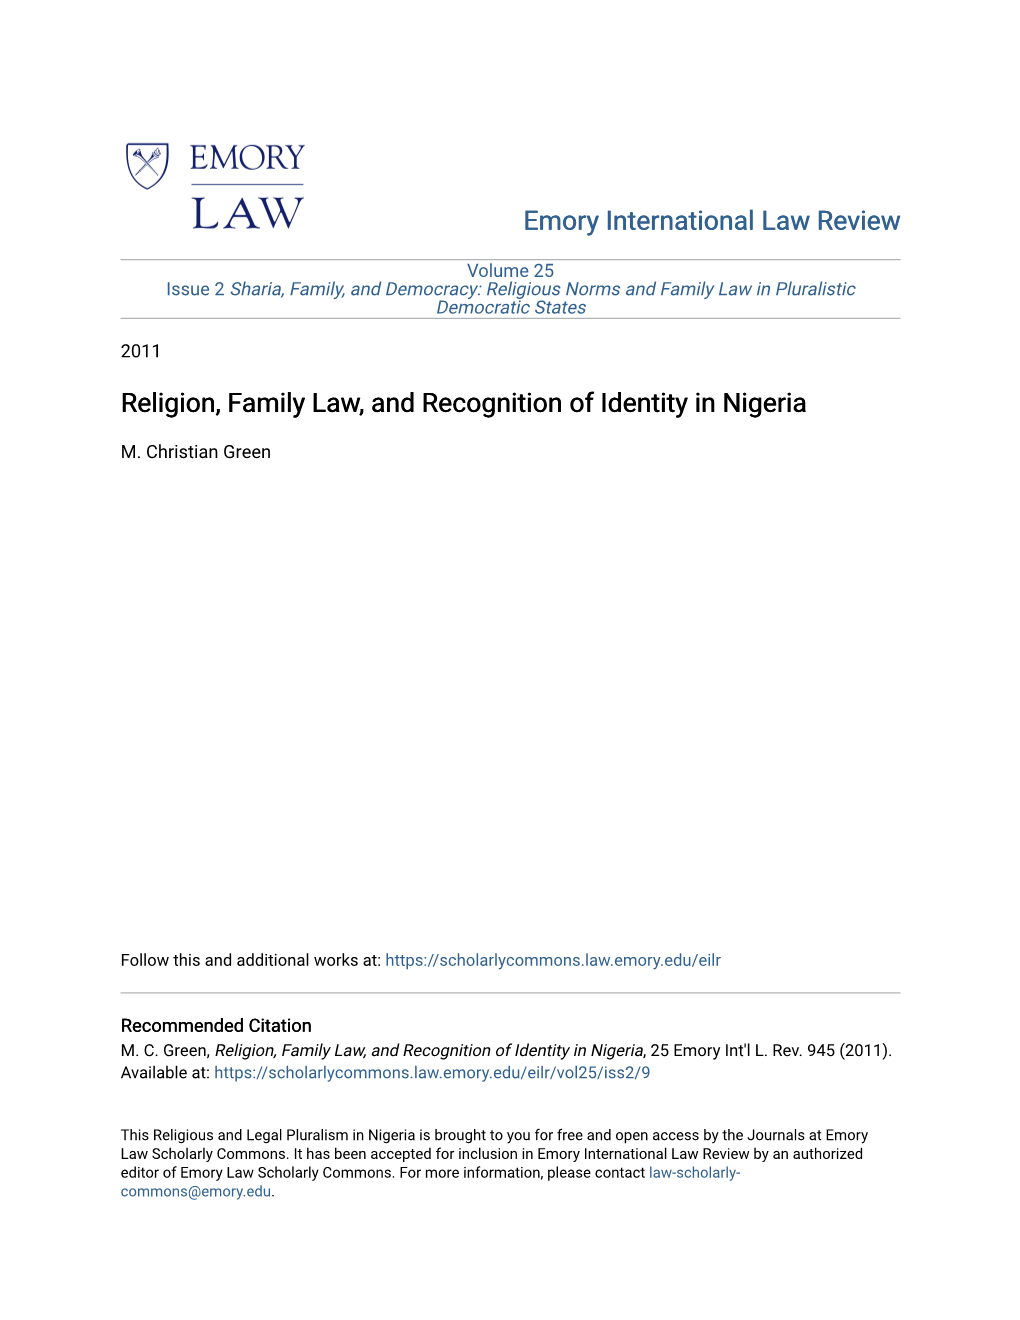 Religion, Family Law, and Recognition of Identity in Nigeria